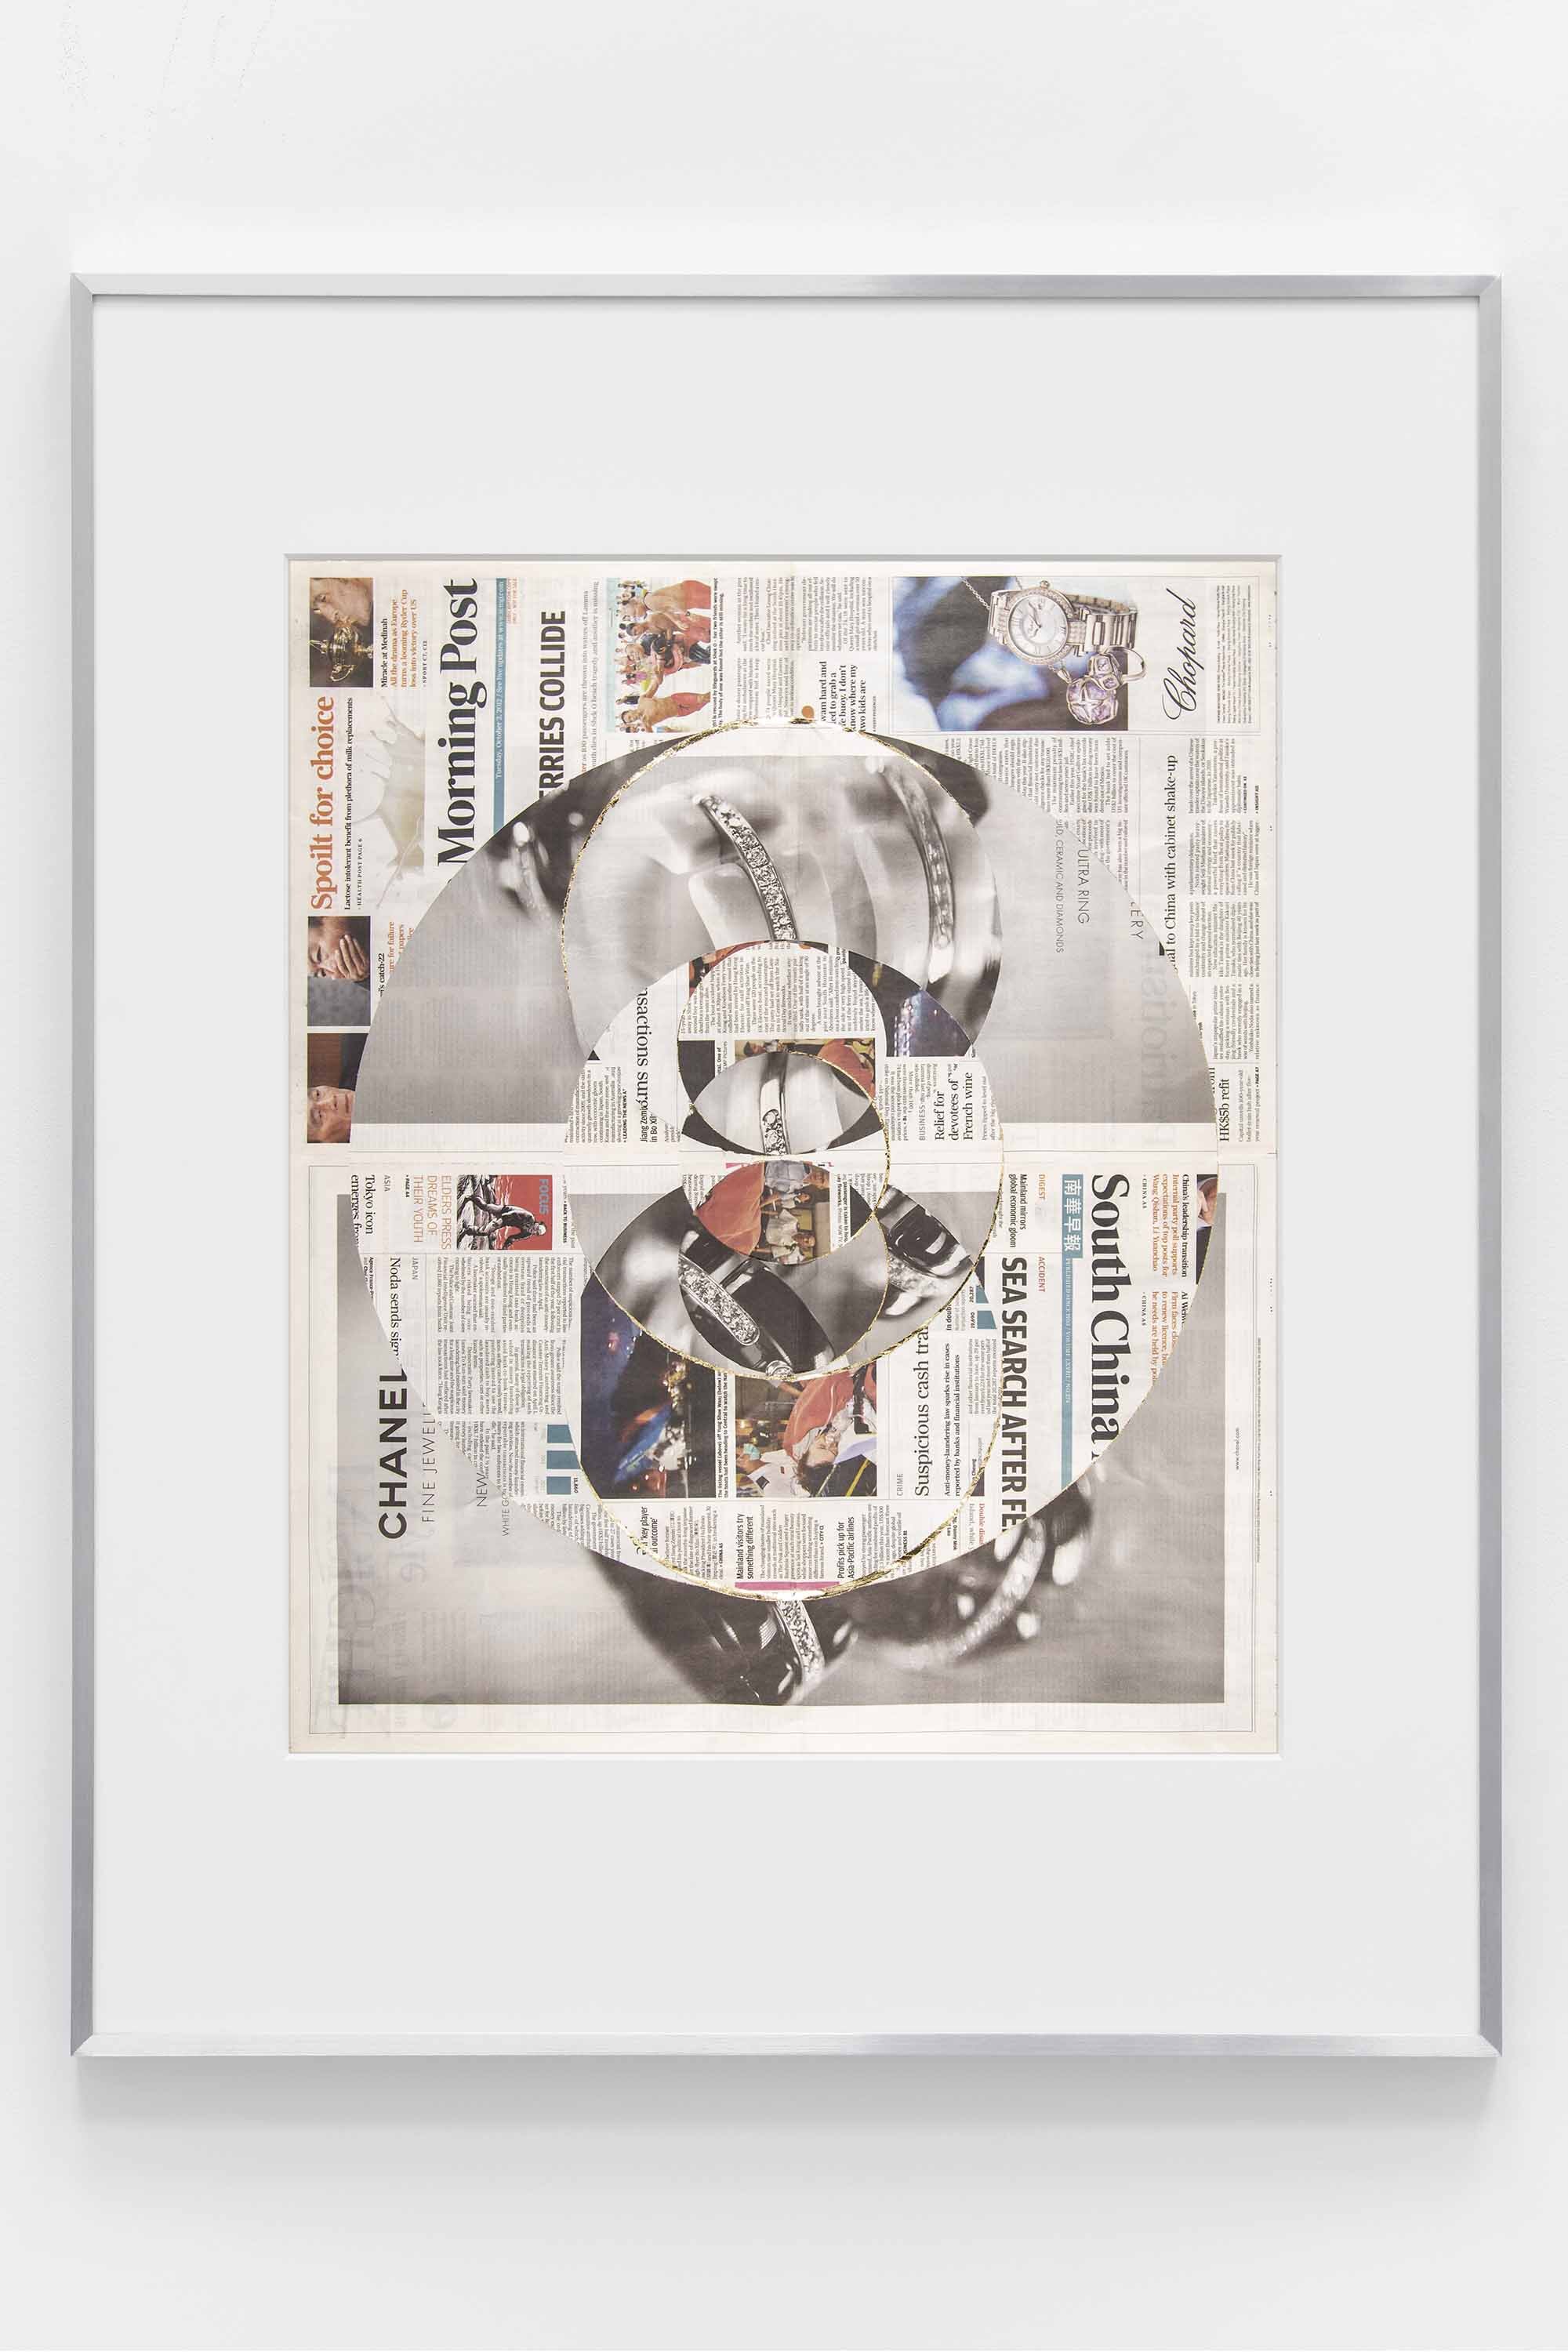   Blind Collage (Seven 180º Rotations, South China Morning Post: Tai Po, Hong Kong, Tuesday, October 2, 2012)    2021   Newspaper, tape, and 22 karat gold leaf  39 1/8 x 31 1/4 inches   Blind Collages, 2017–  